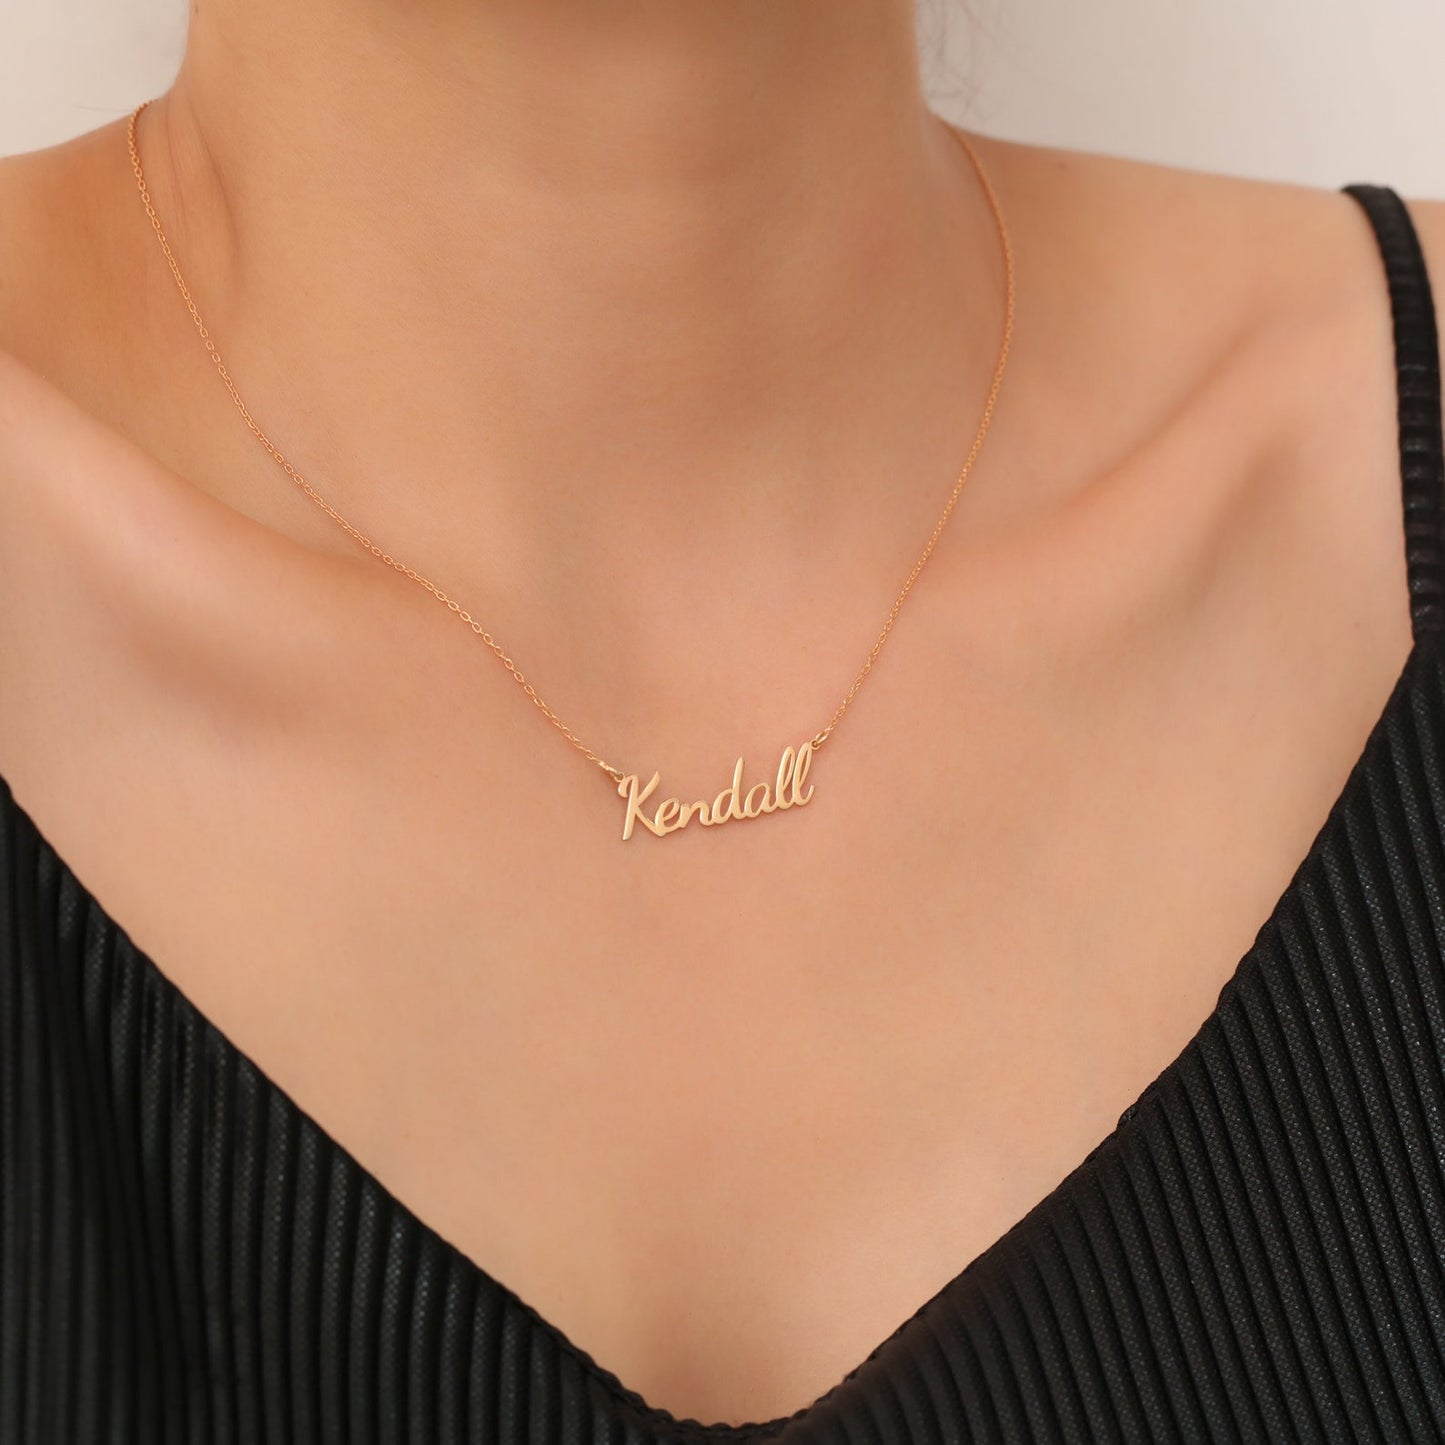 14K Solid Gold Name Necklace, Personalized Name Necklace, 14K Gold Name Necklace, Custom Name Necklace for Women, gift for lover